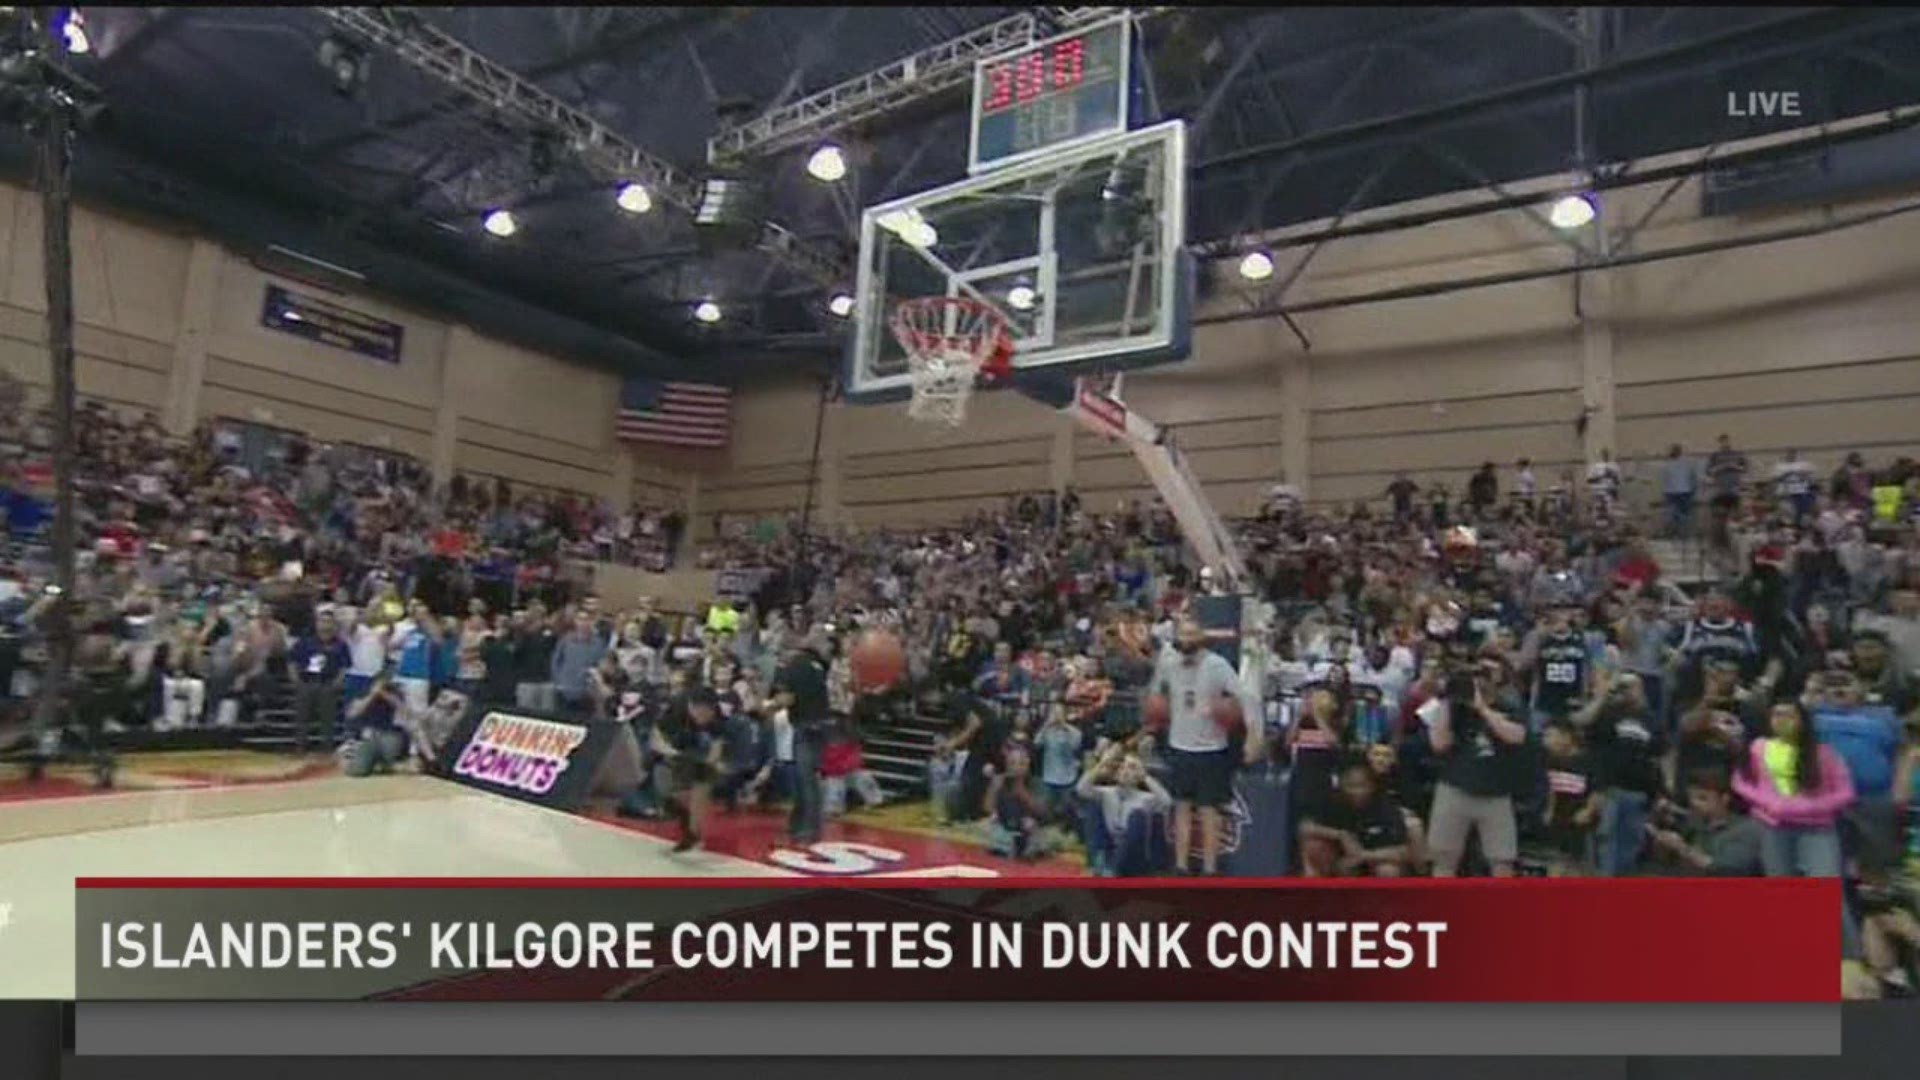 The former Islander Kilgore won the College Slam Dunk Contest Thursday in Saturday in advance of the Final Four this weekend.